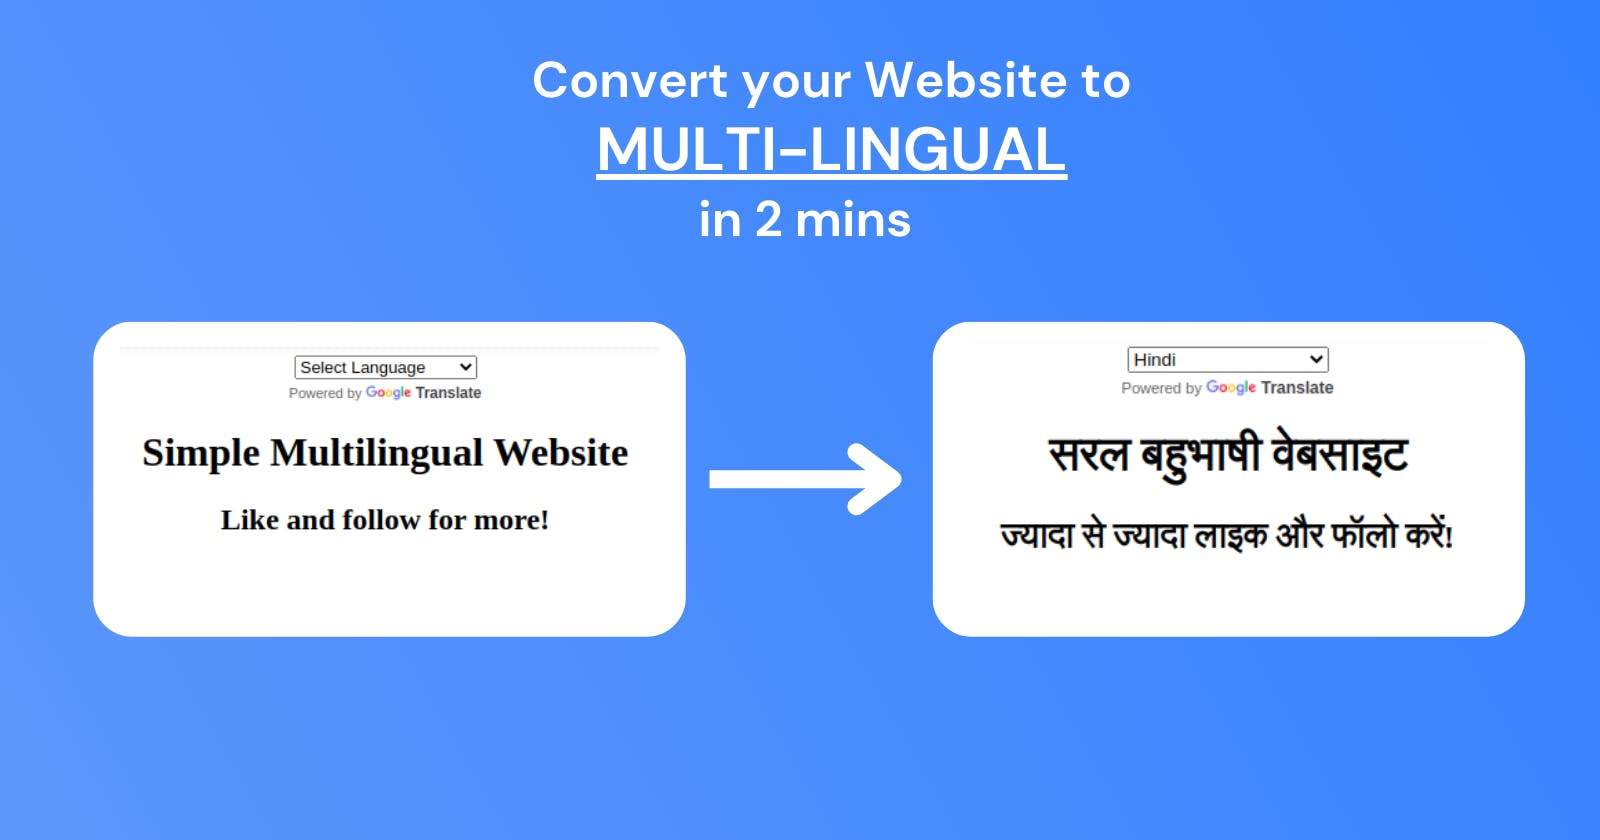 Making Multi-Lingual Website in 2 minutes